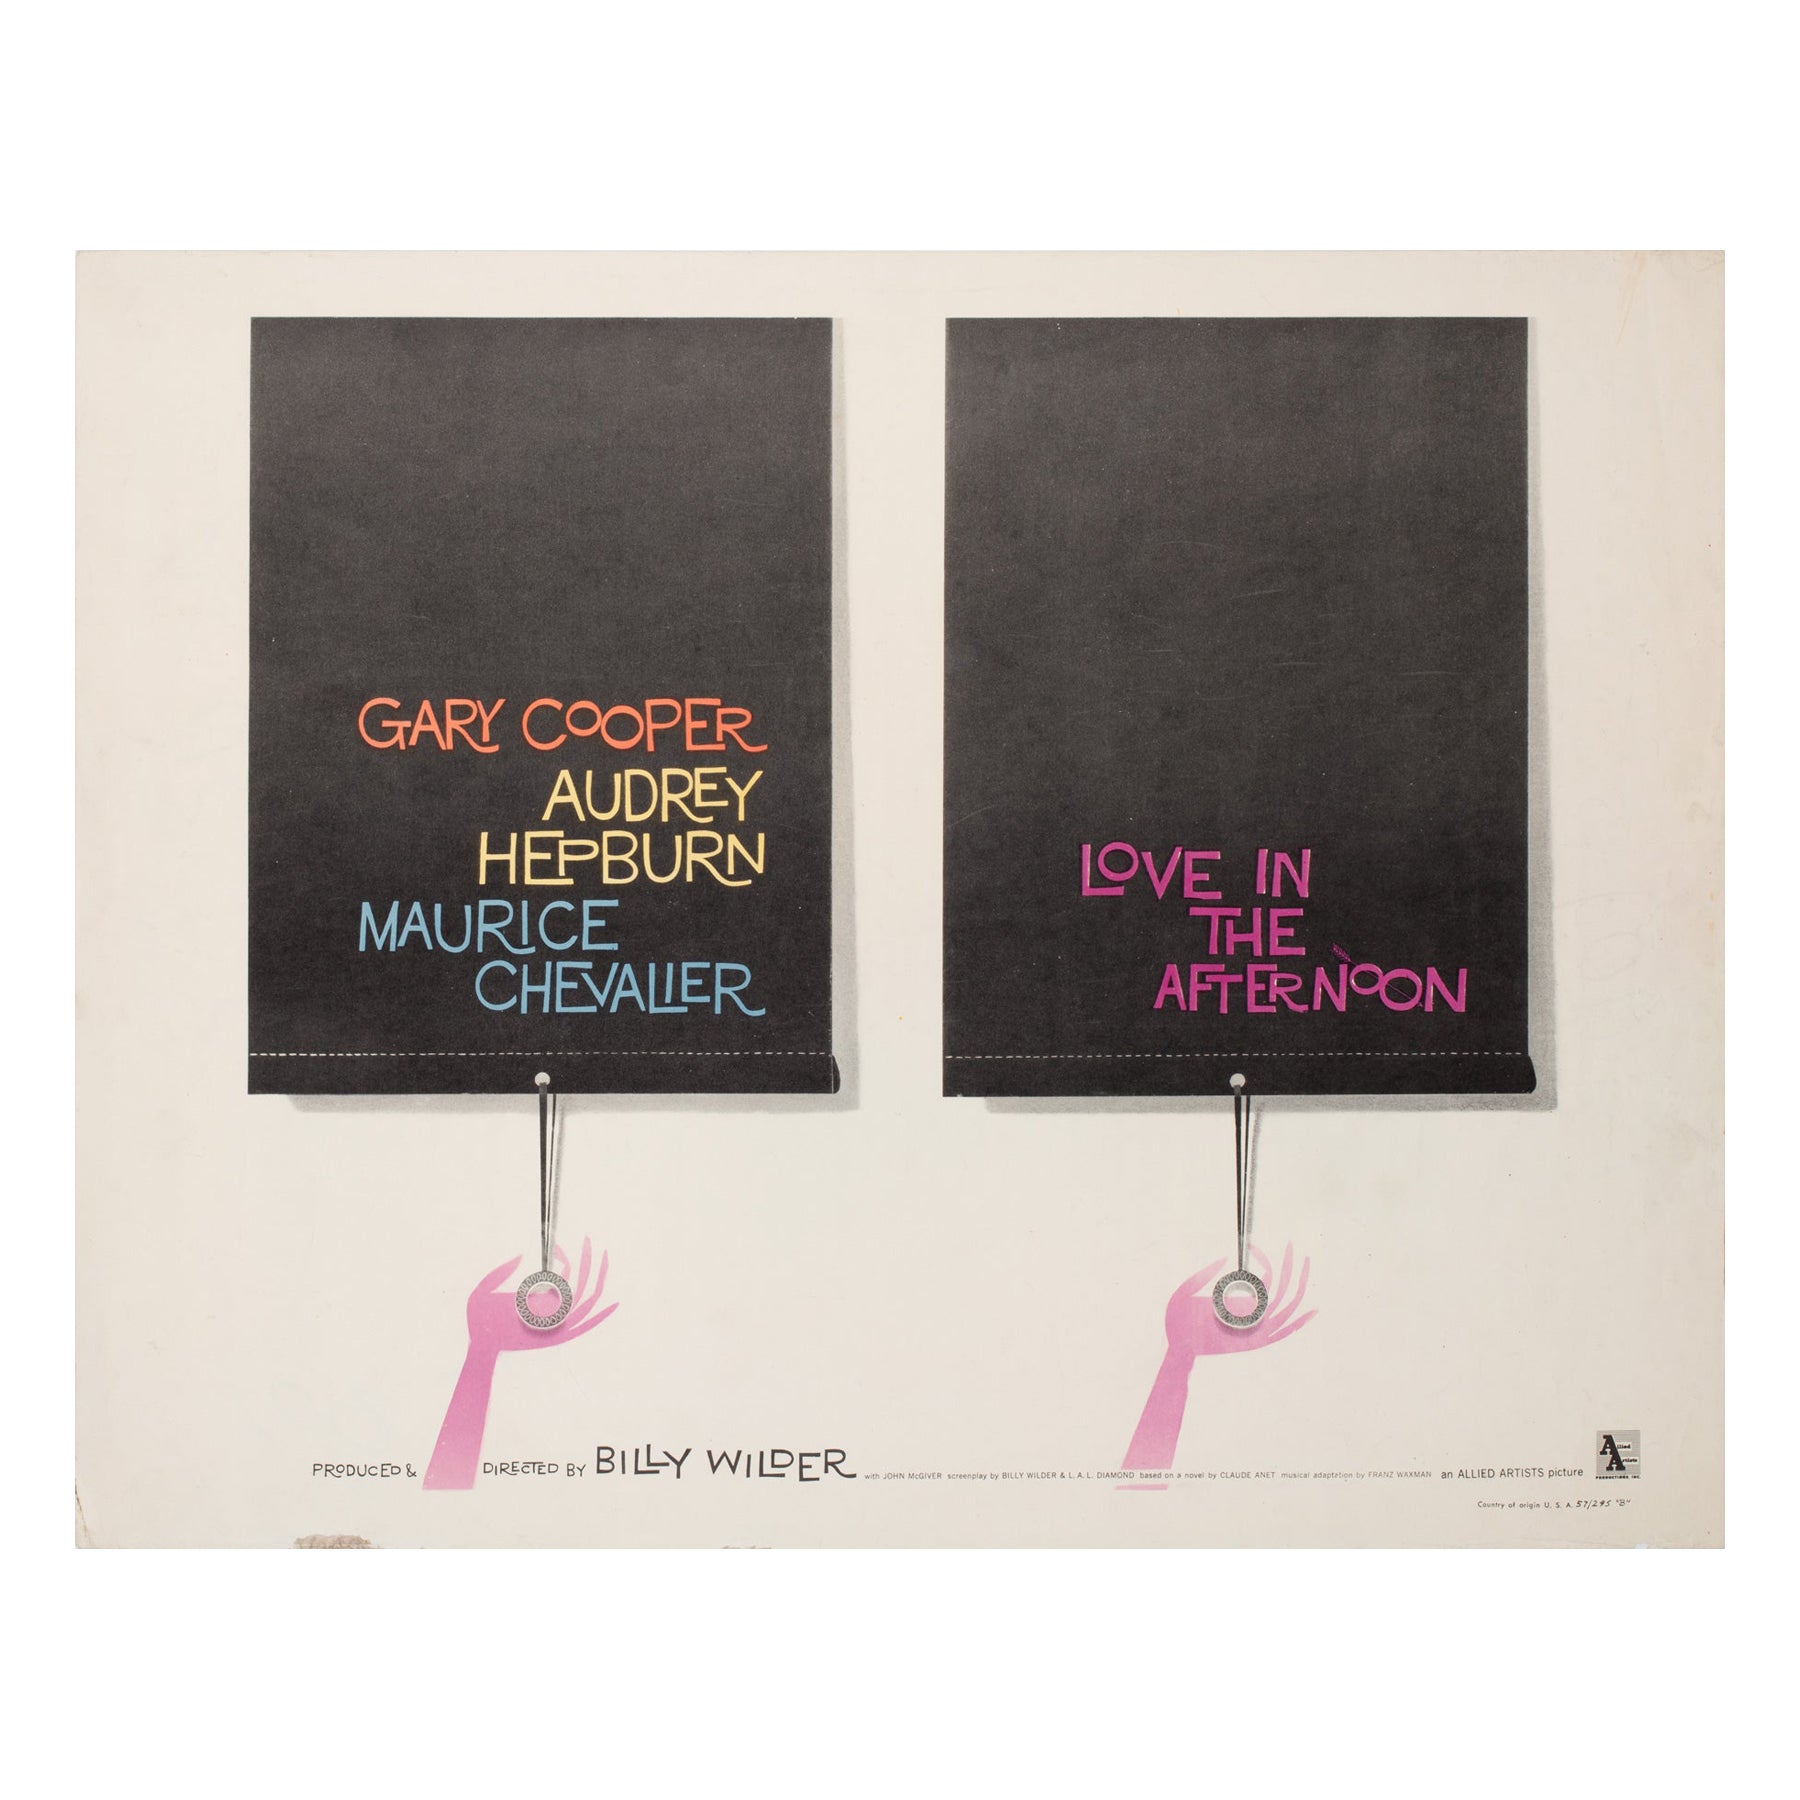 Love in the Afternoon 1957 US 1/2 Sheet Film Poster, Saul Bass